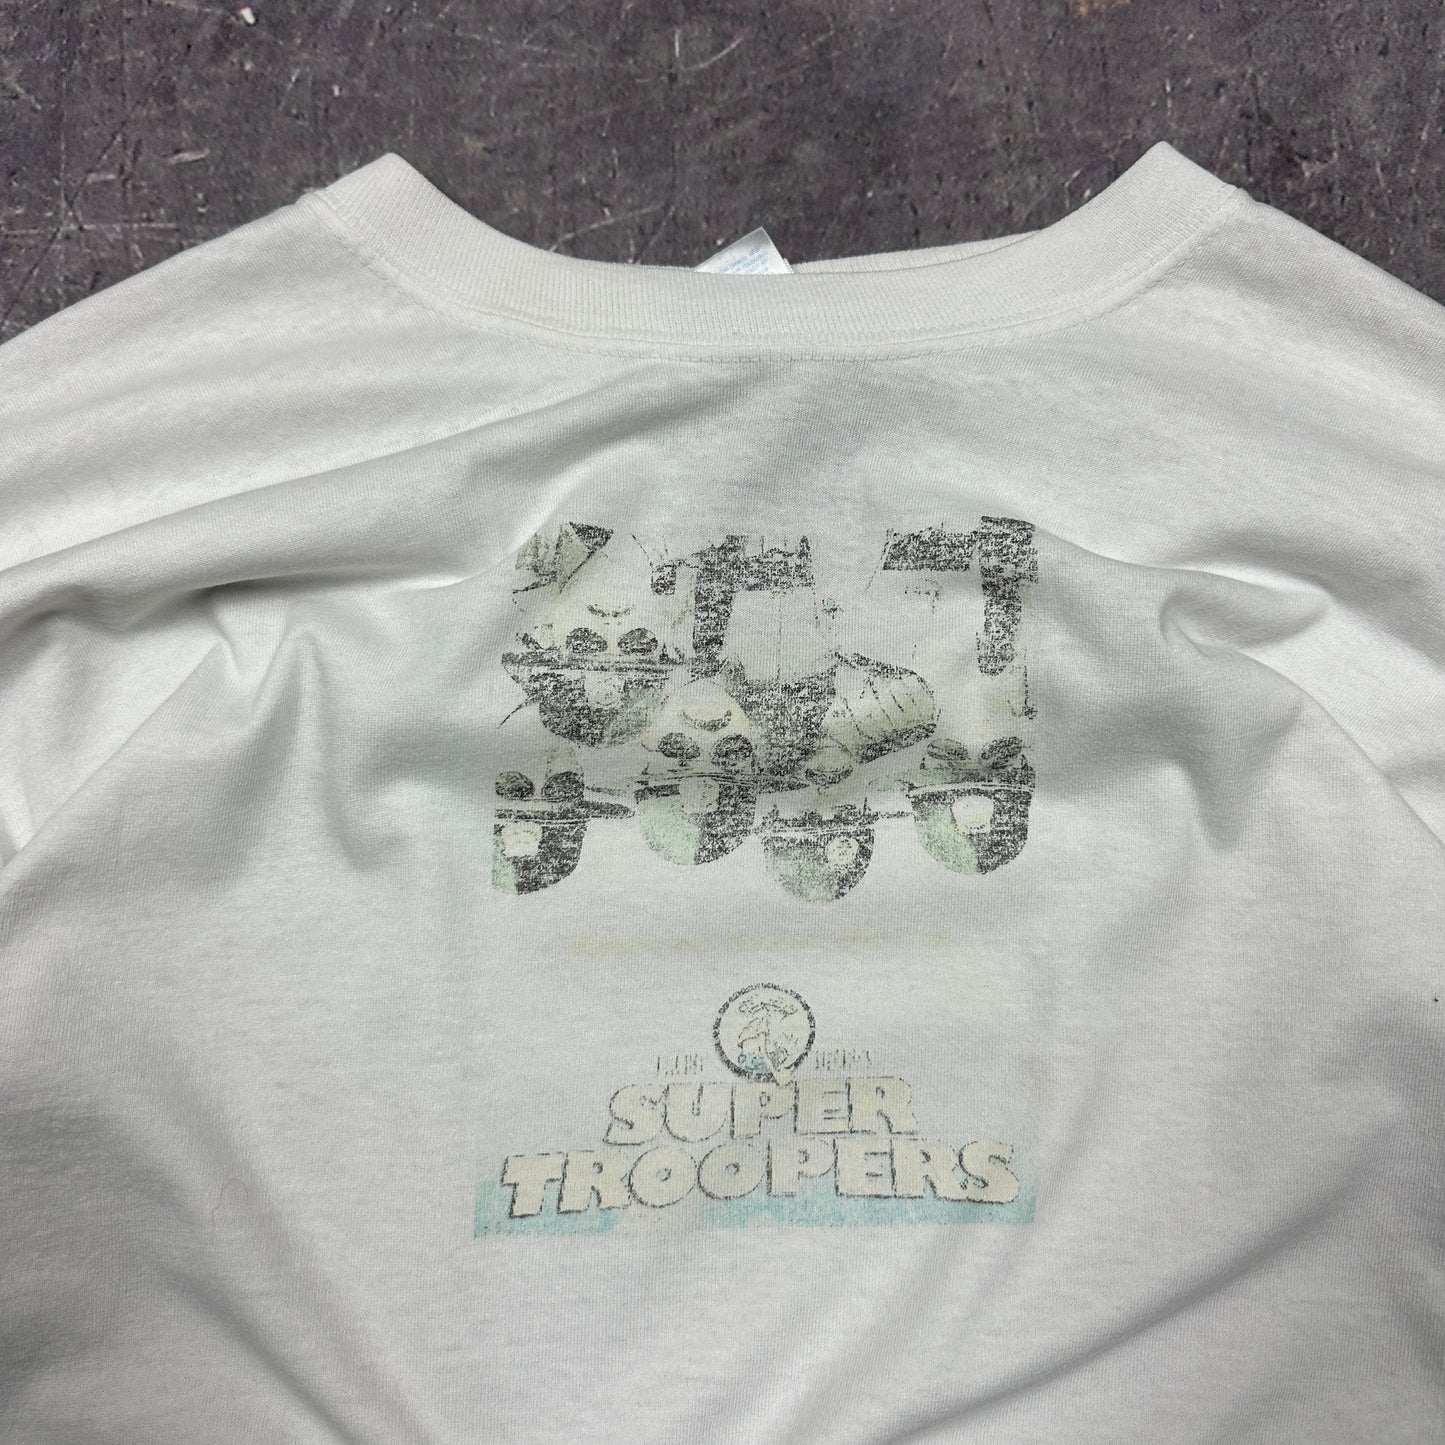 2001 Super Troopers Poster Print Movie Promo Shirt L 049